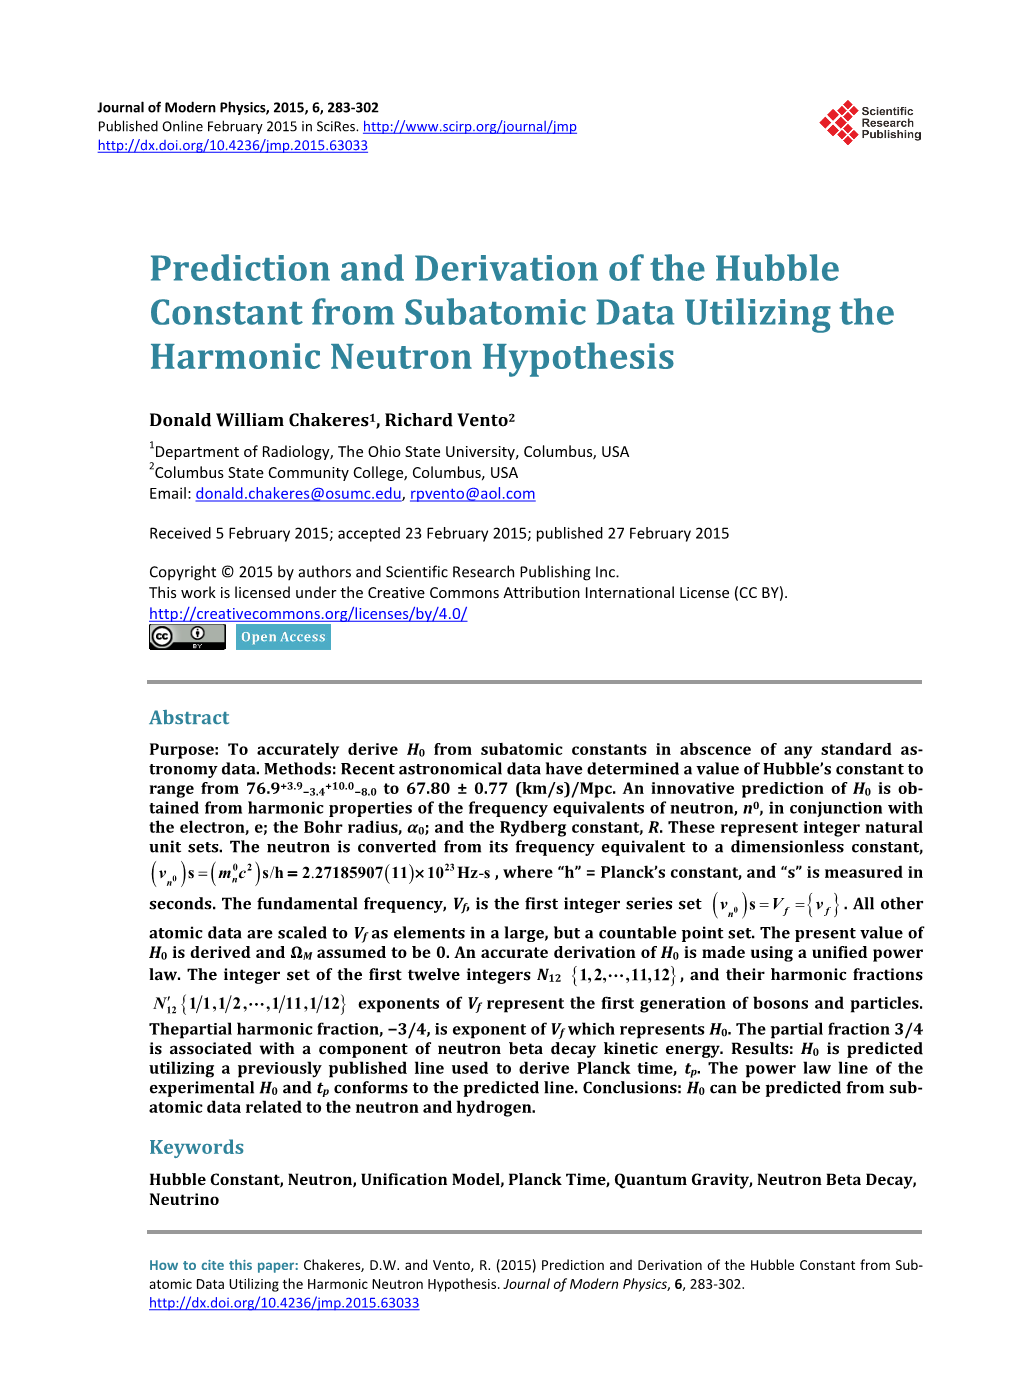 Prediction and Derivation of the Hubble Constant from Subatomic Data Utilizing the Harmonic Neutron Hypothesis